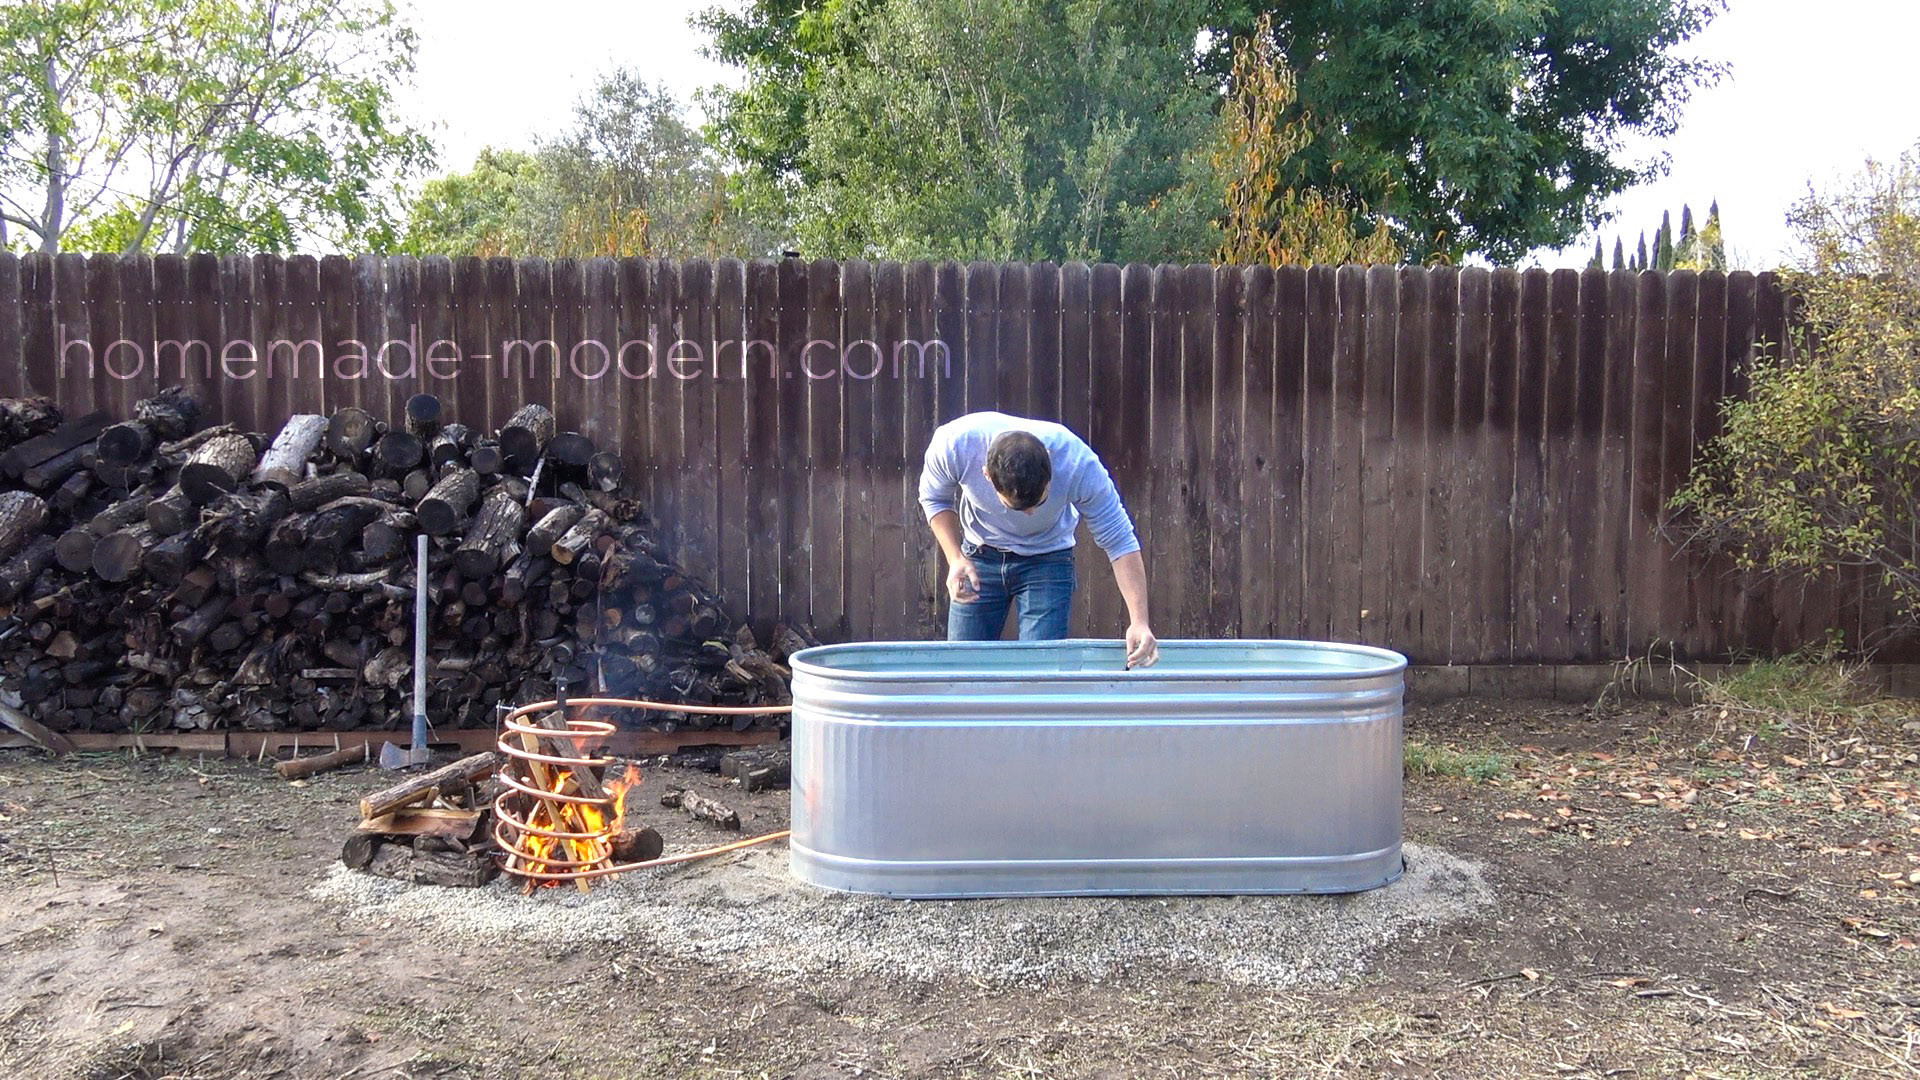 Best ideas about Wood Burner Hot Tub DIY
. Save or Pin HomeMade Modern EP112 DIY Wood Fired Hot Tub Now.